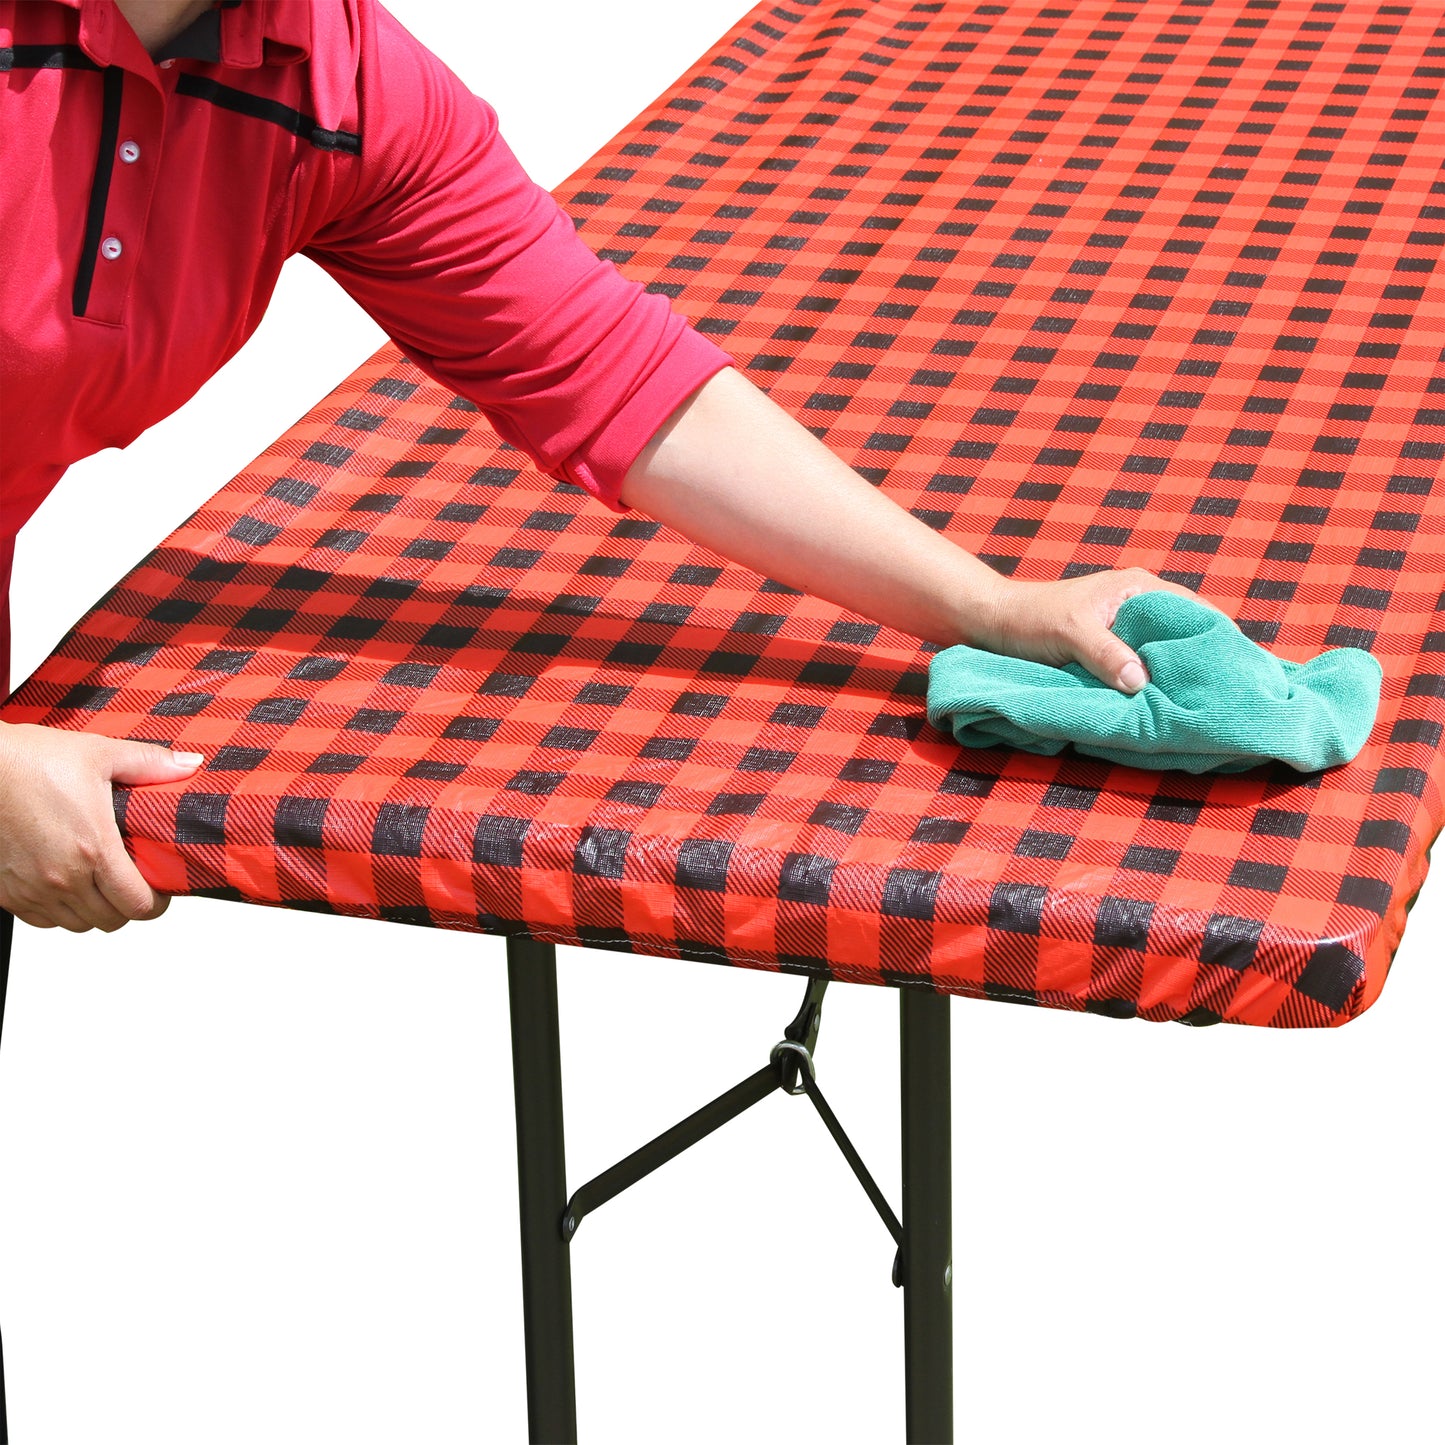 Water beading up on the water resistant surface of TableCloth PLUS 96" Checkerboard Black and Red Fitted PEVA Vinyl Tablecloth for 8' Folding Tables